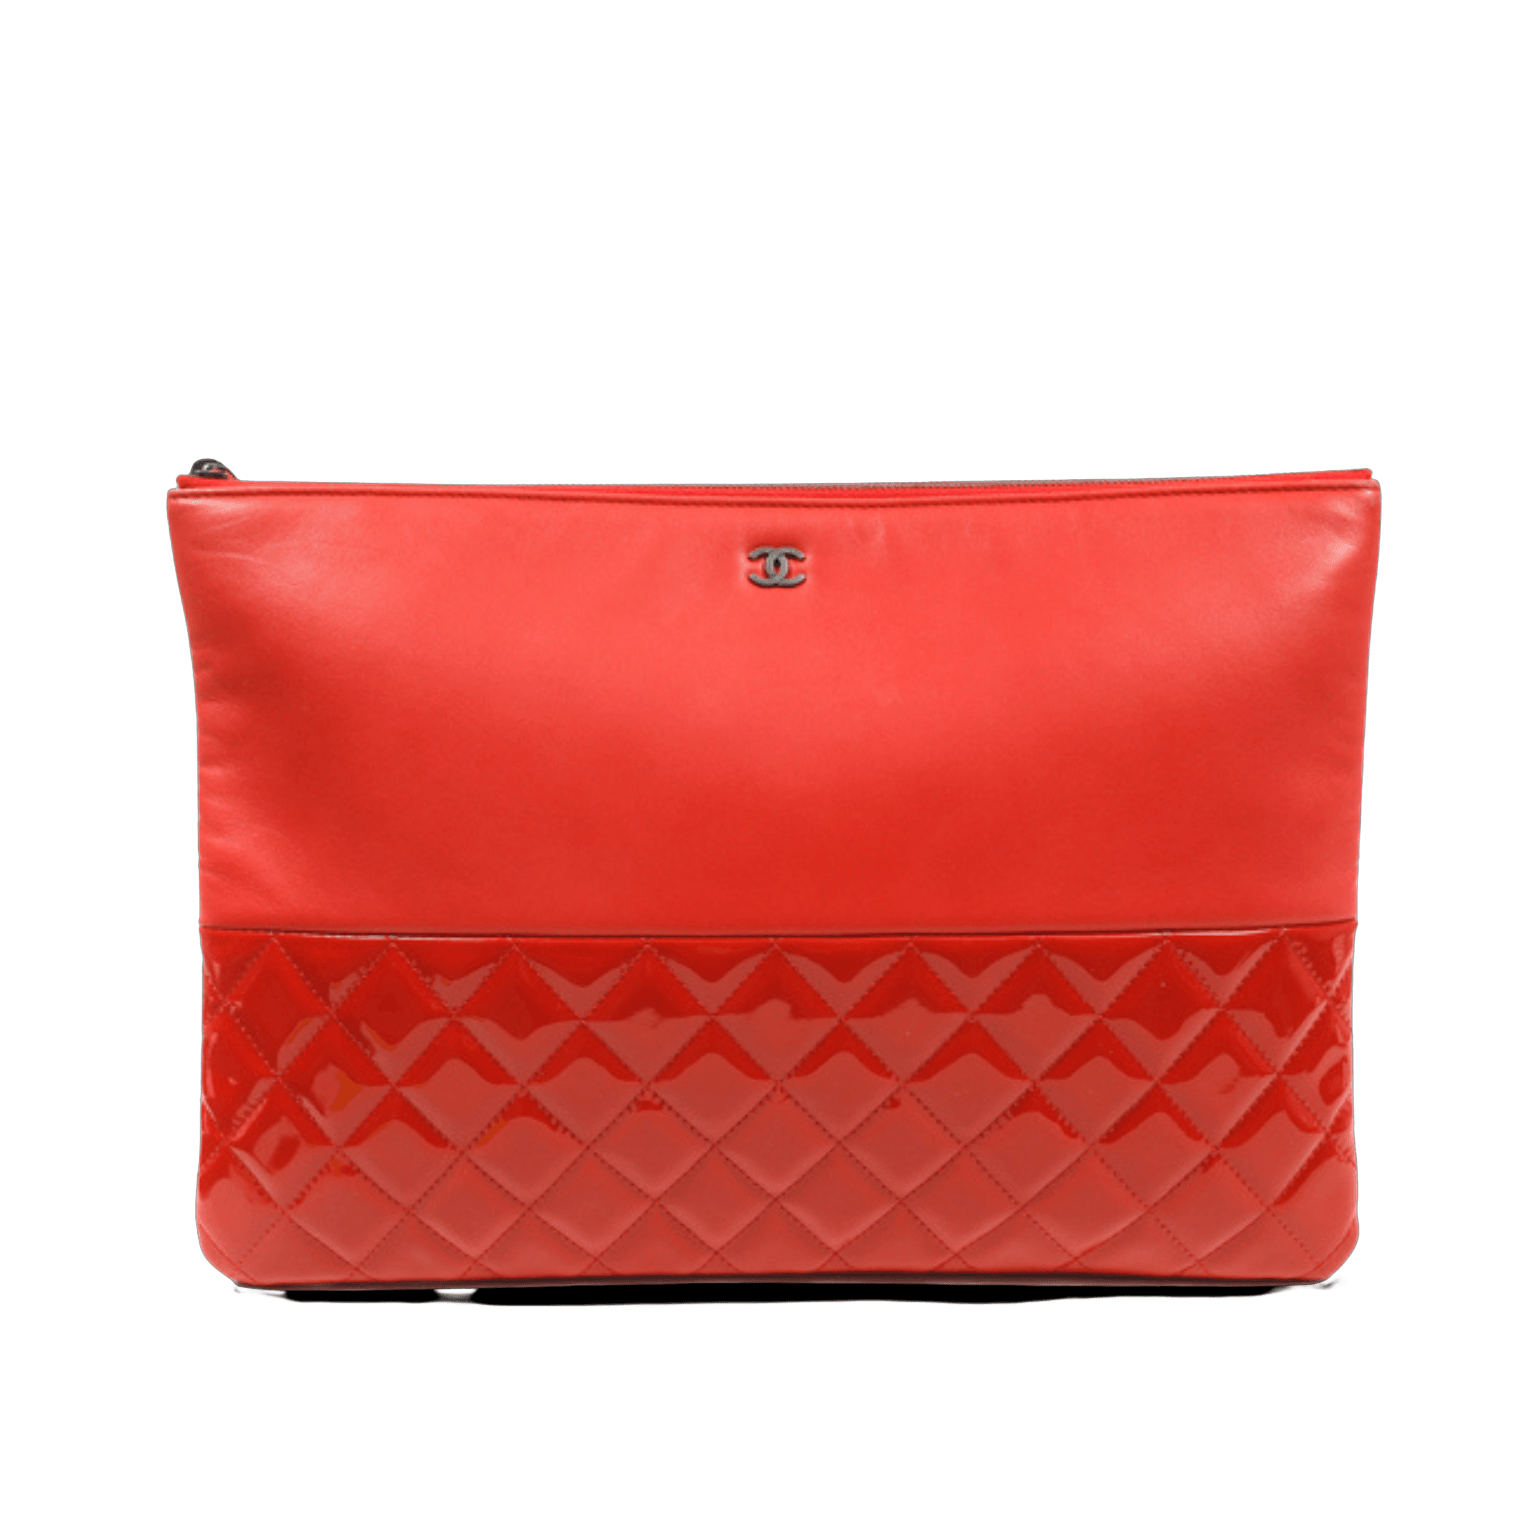 Chanel Red Lambskin and Patent Leather Clutch – Only Authentics